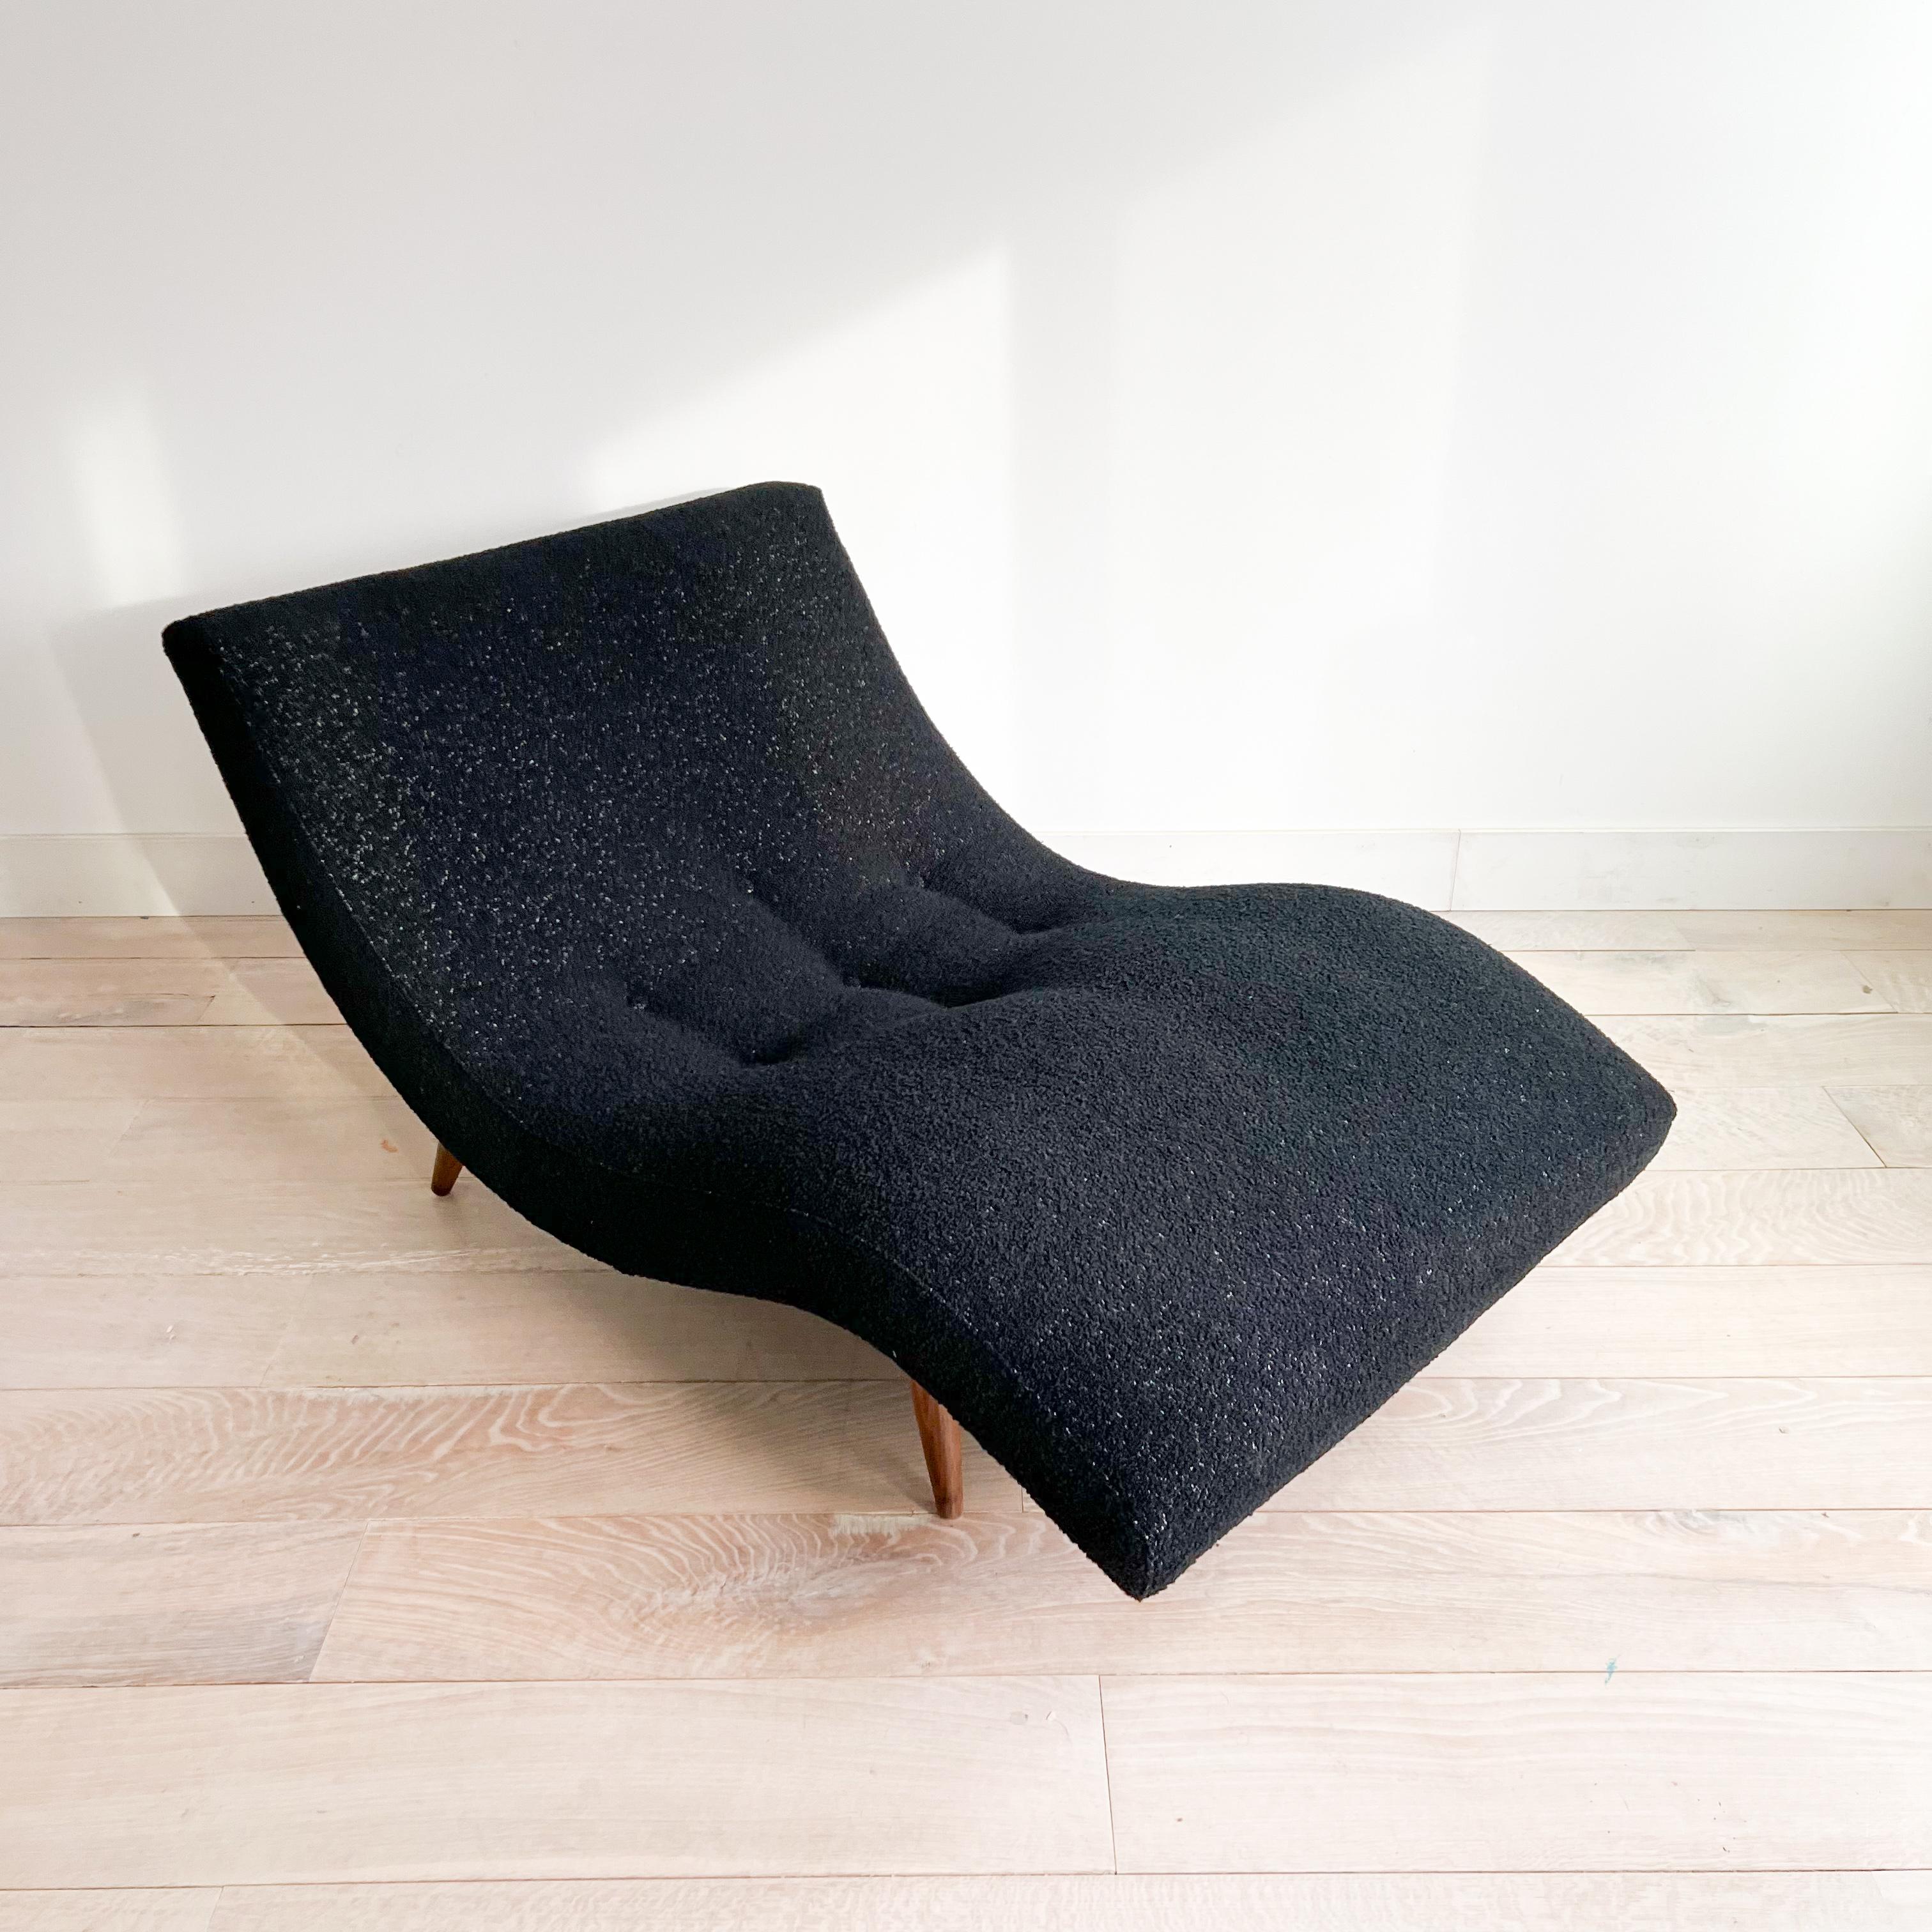  Elevate your relaxation experience with this iconic mid-century modern wave chaise lounge, featuring a sleek design and new textured black upholstery. Perfect for lounging in style, this chaise is a must-have addition to any contemporary living